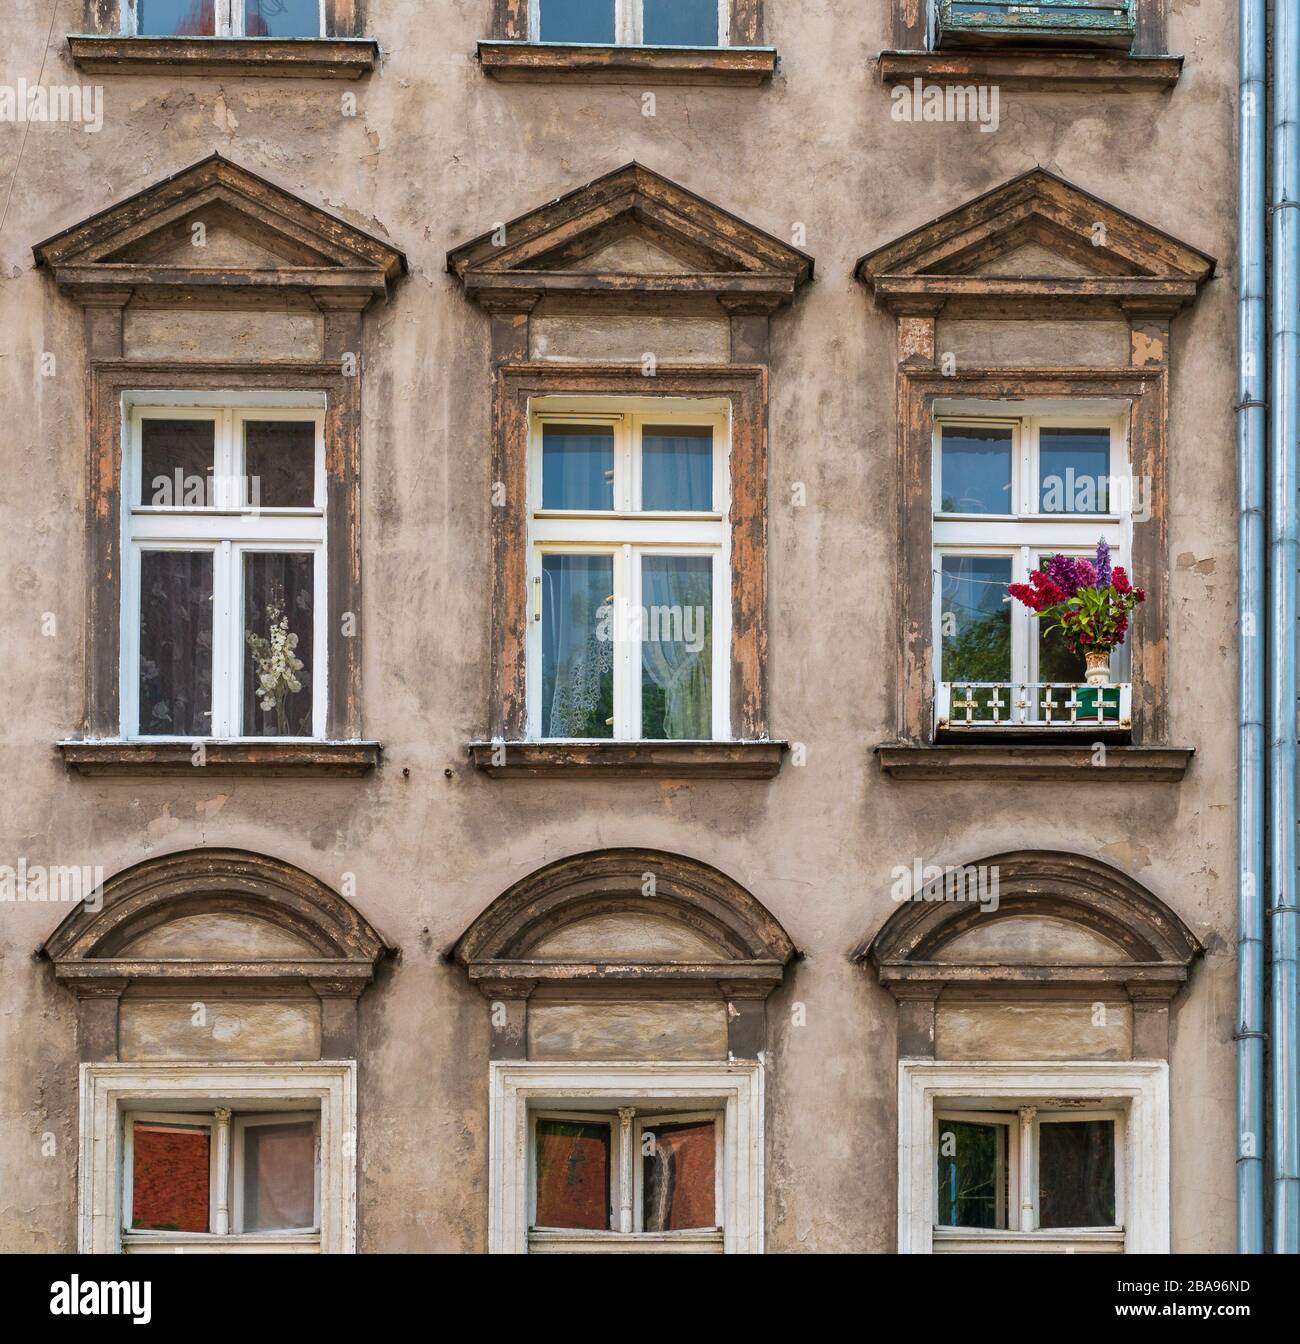 Weathered and stained house facade with rows of windows and one vibrant bunch of flowers on a window sill in Wroclaw, full-frame close-up Stock Photo